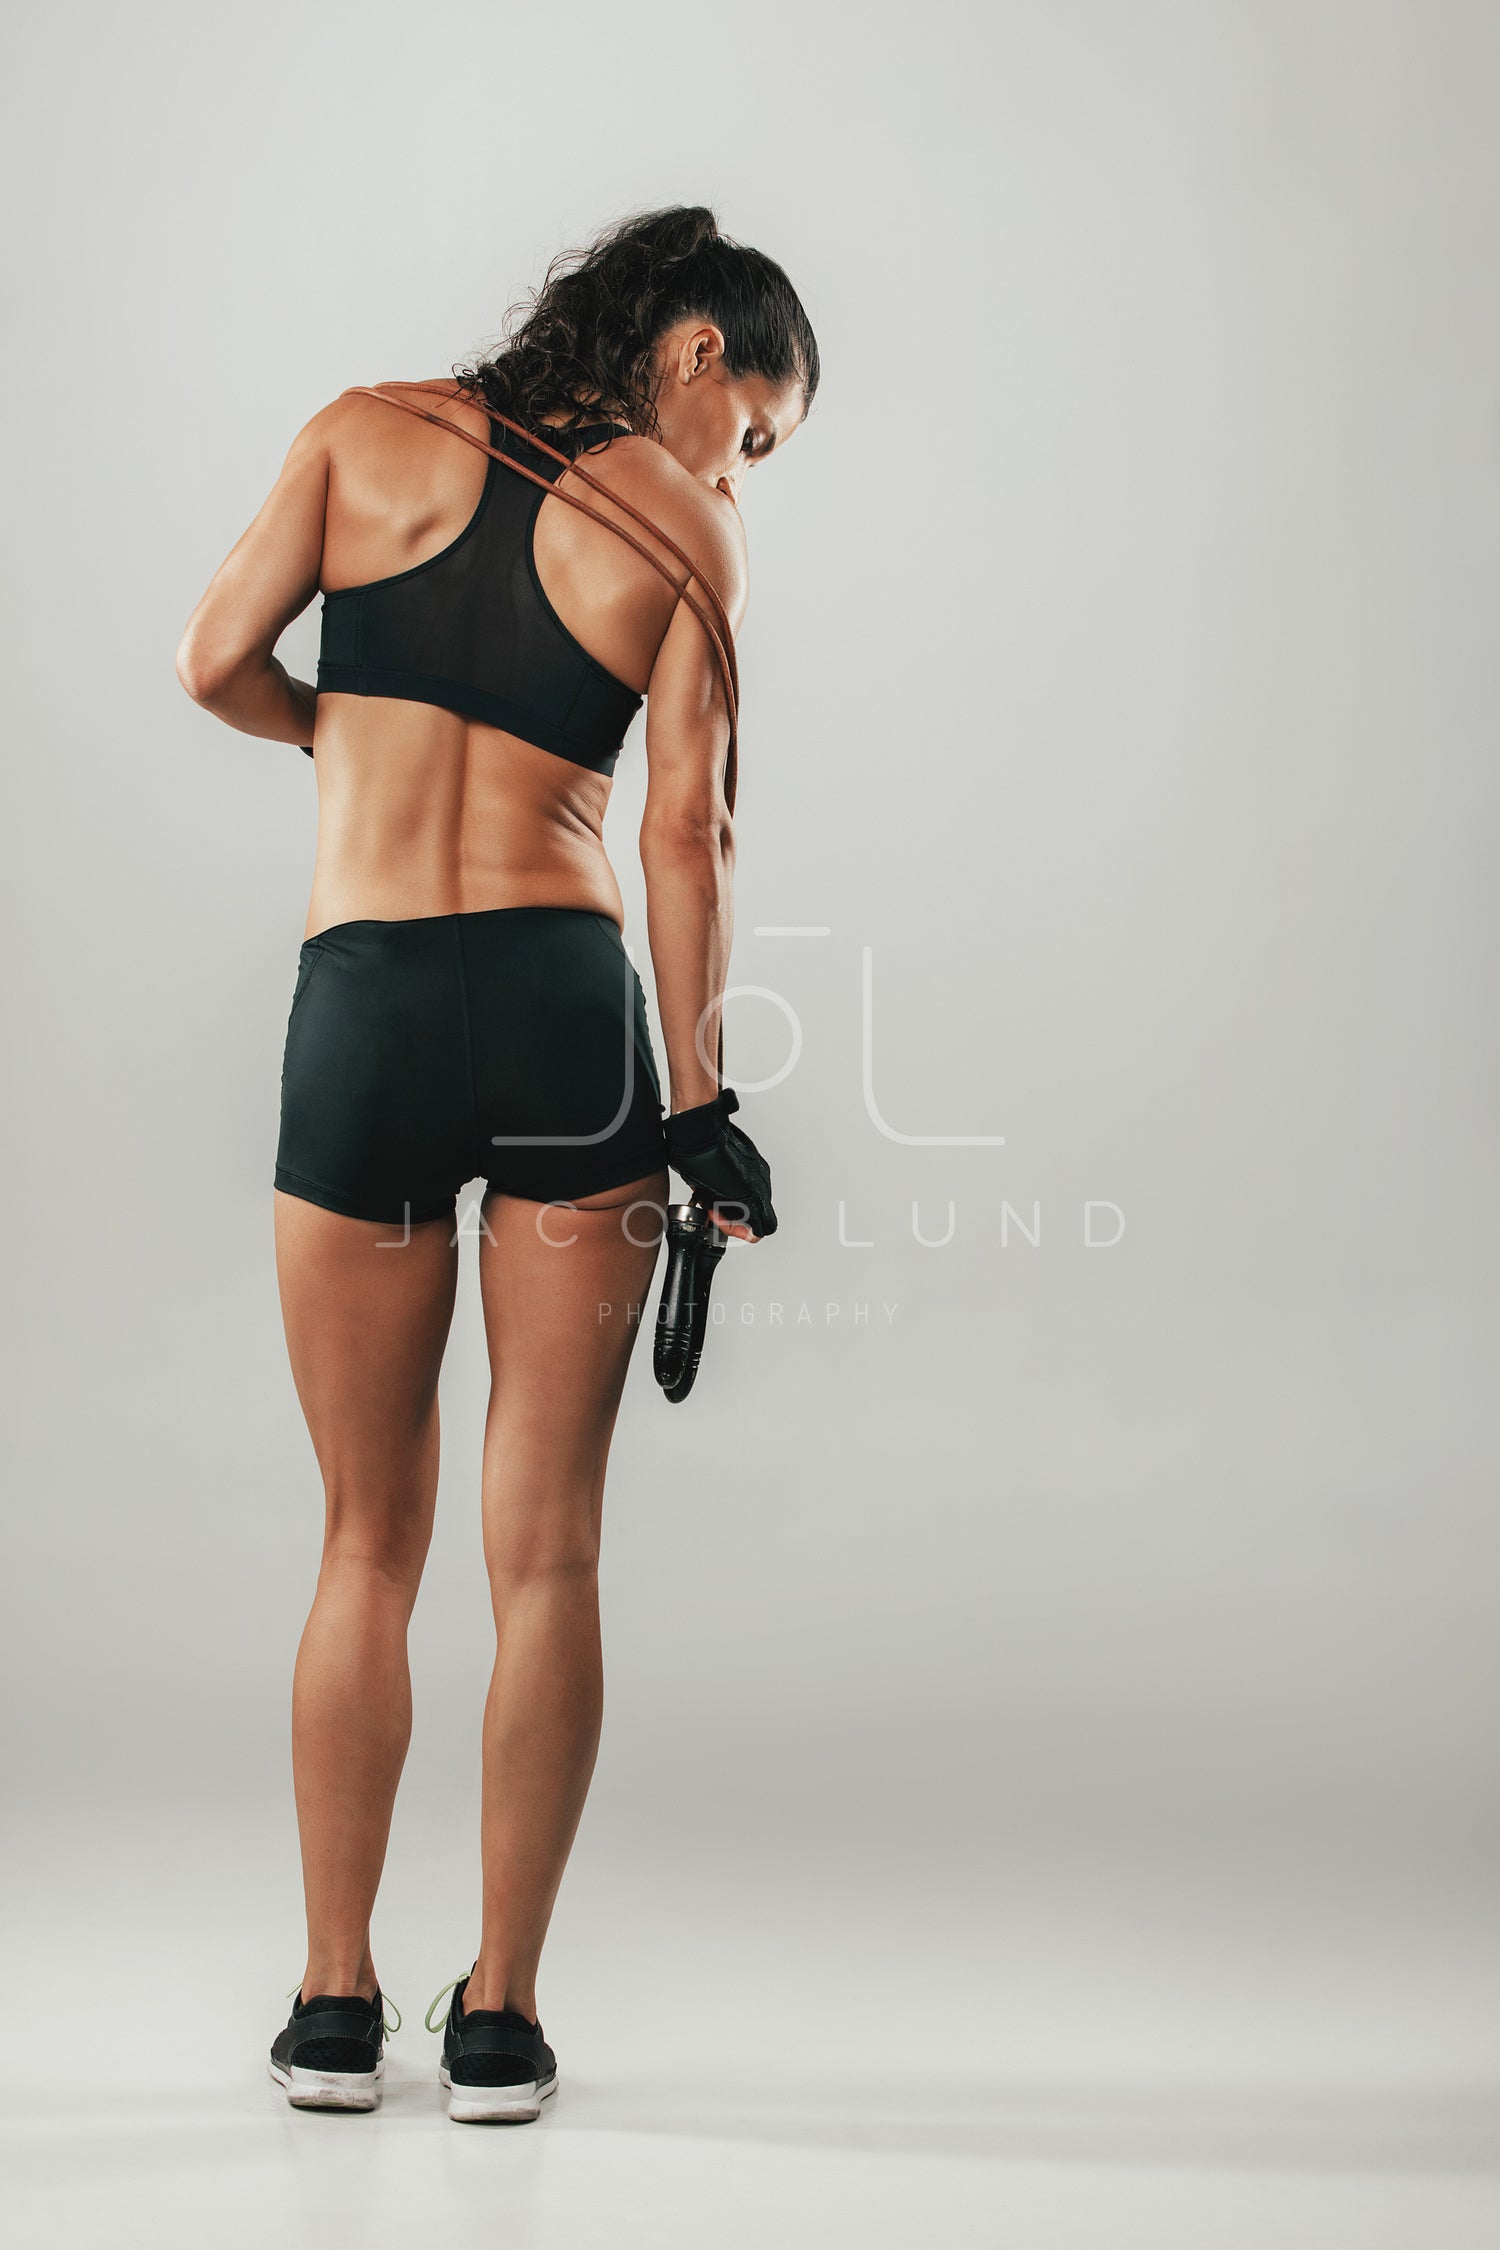 Muscular woman in sports bra – Jacob Lund Photography Store